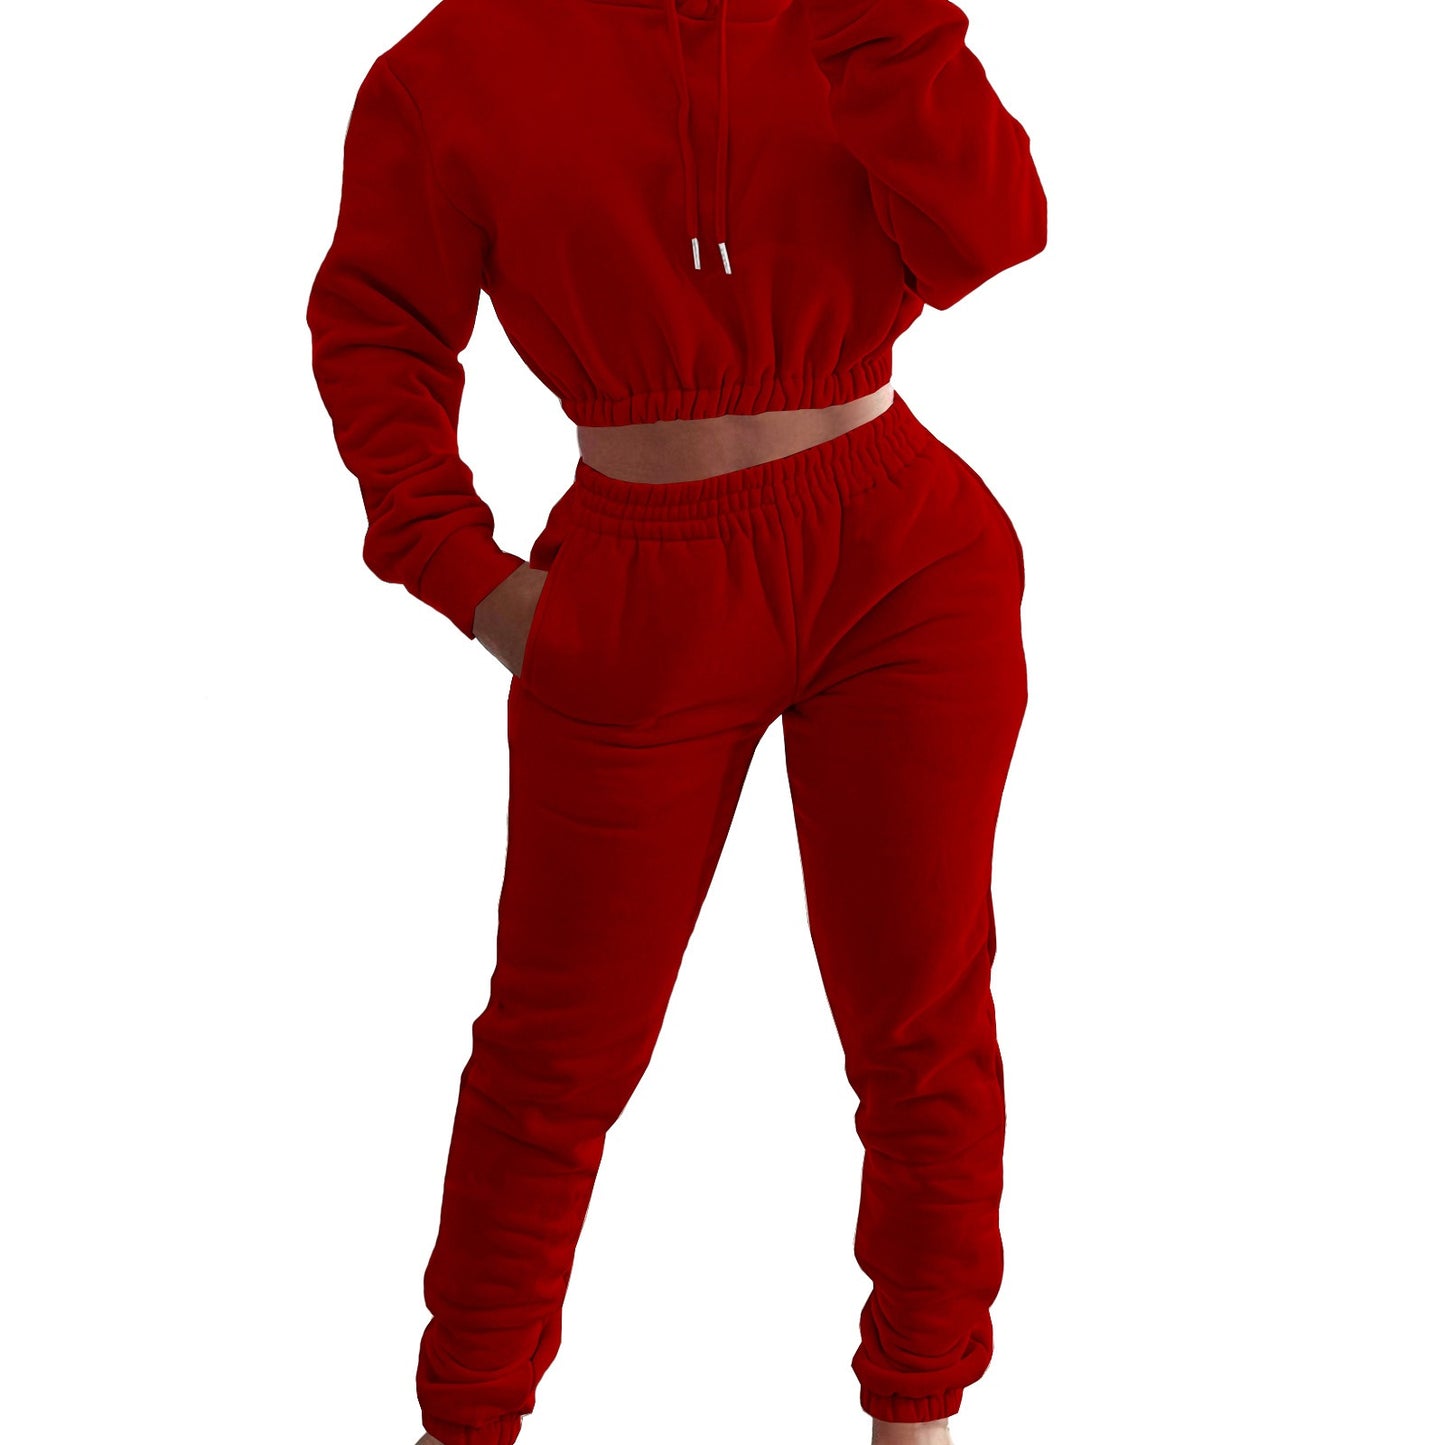 Women's Spring And Winter Plush Sports Casual Suit Hoodie+Jogging Pants Two-Piece Set